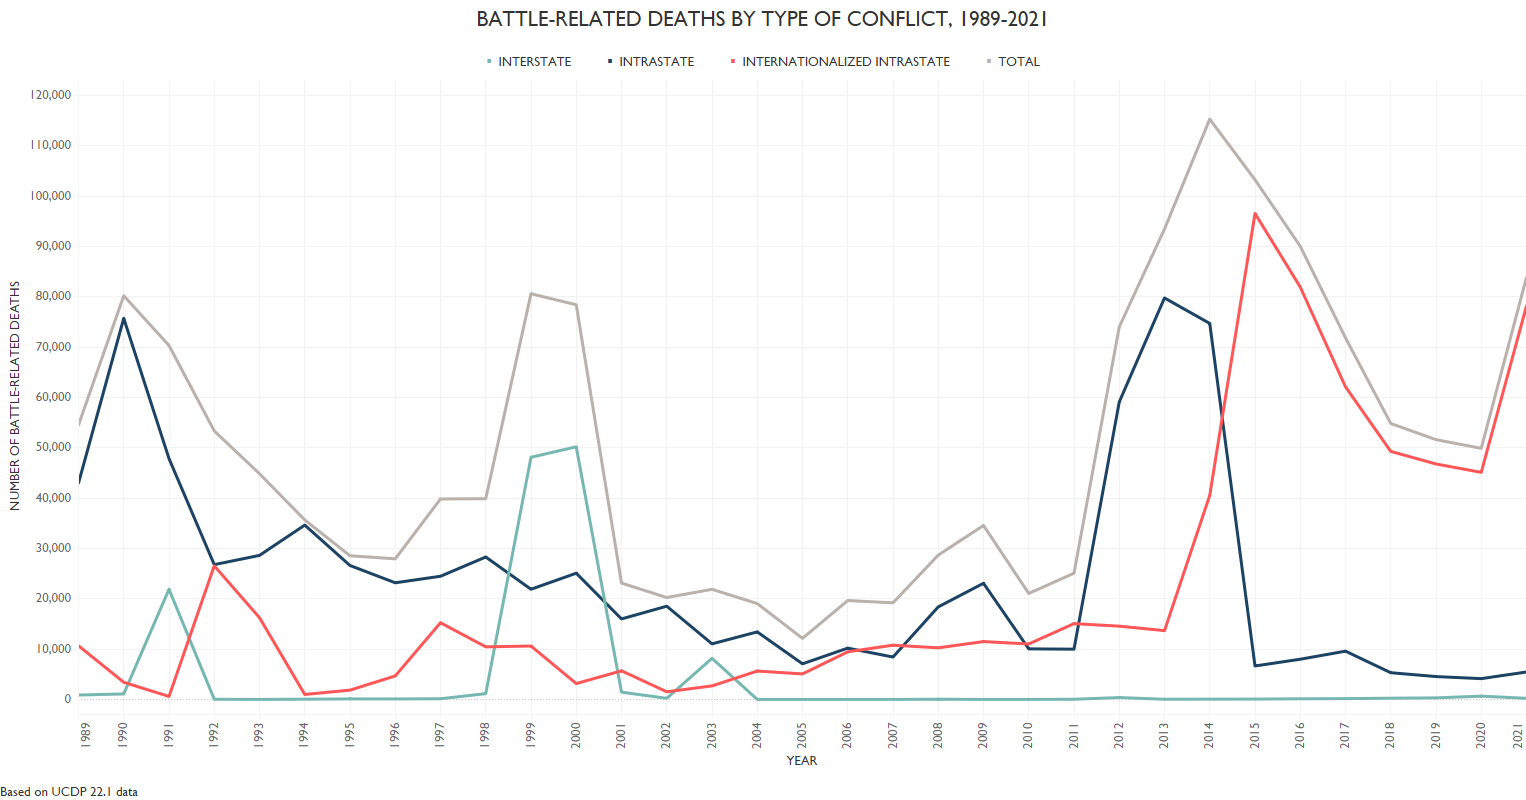 State-based: Battle-related deaths by type of conflict (1989-2021)